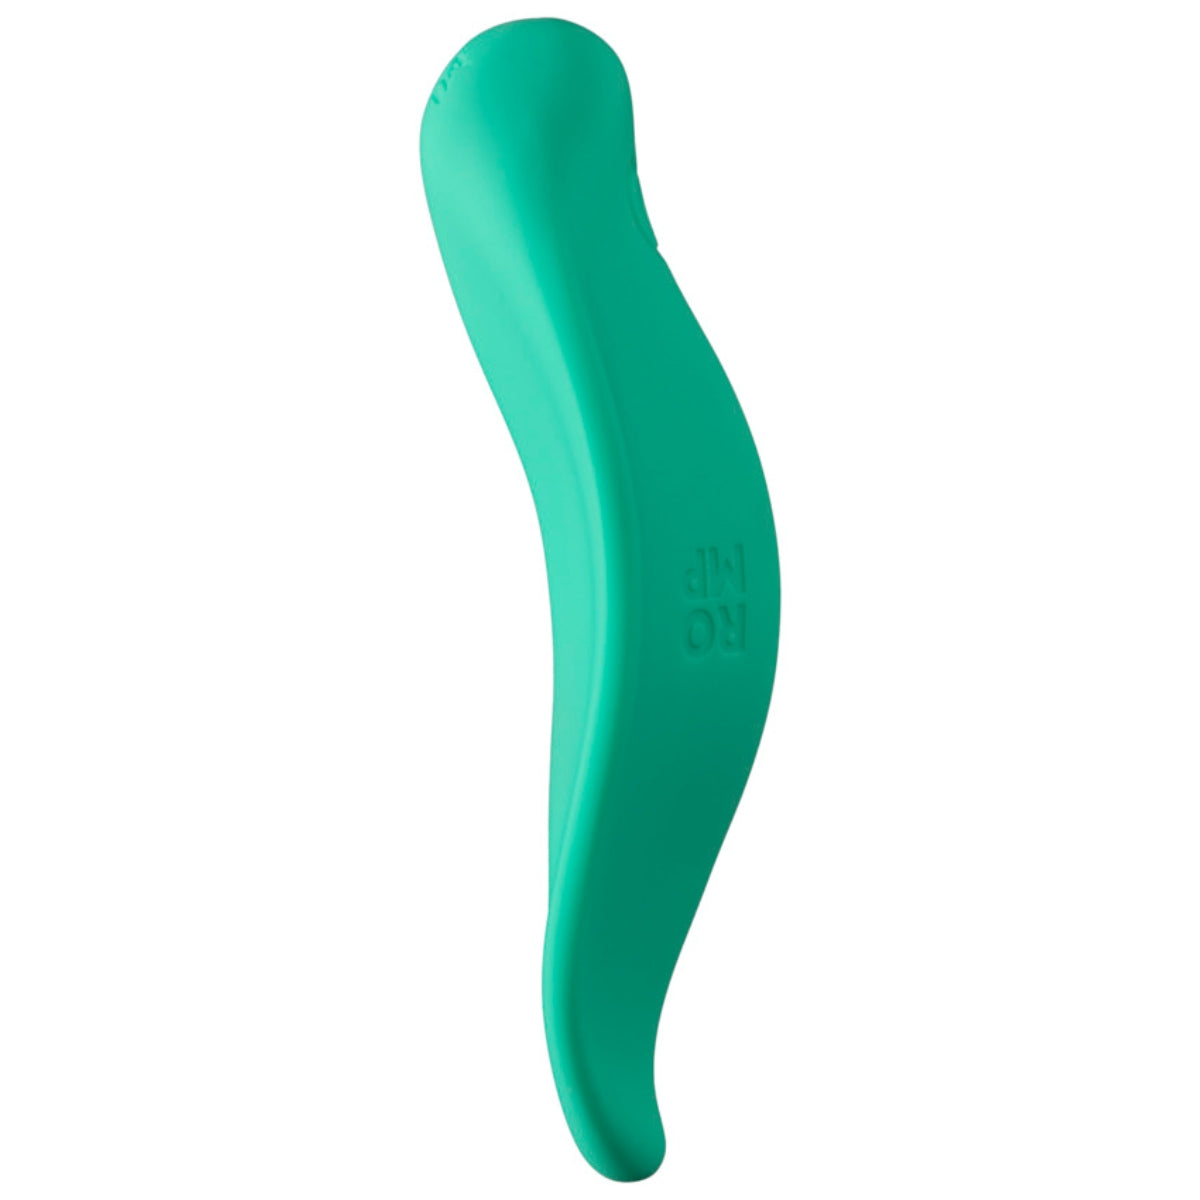 Romp Wave "Rechargeable" Lay On Clitoral Vibrator